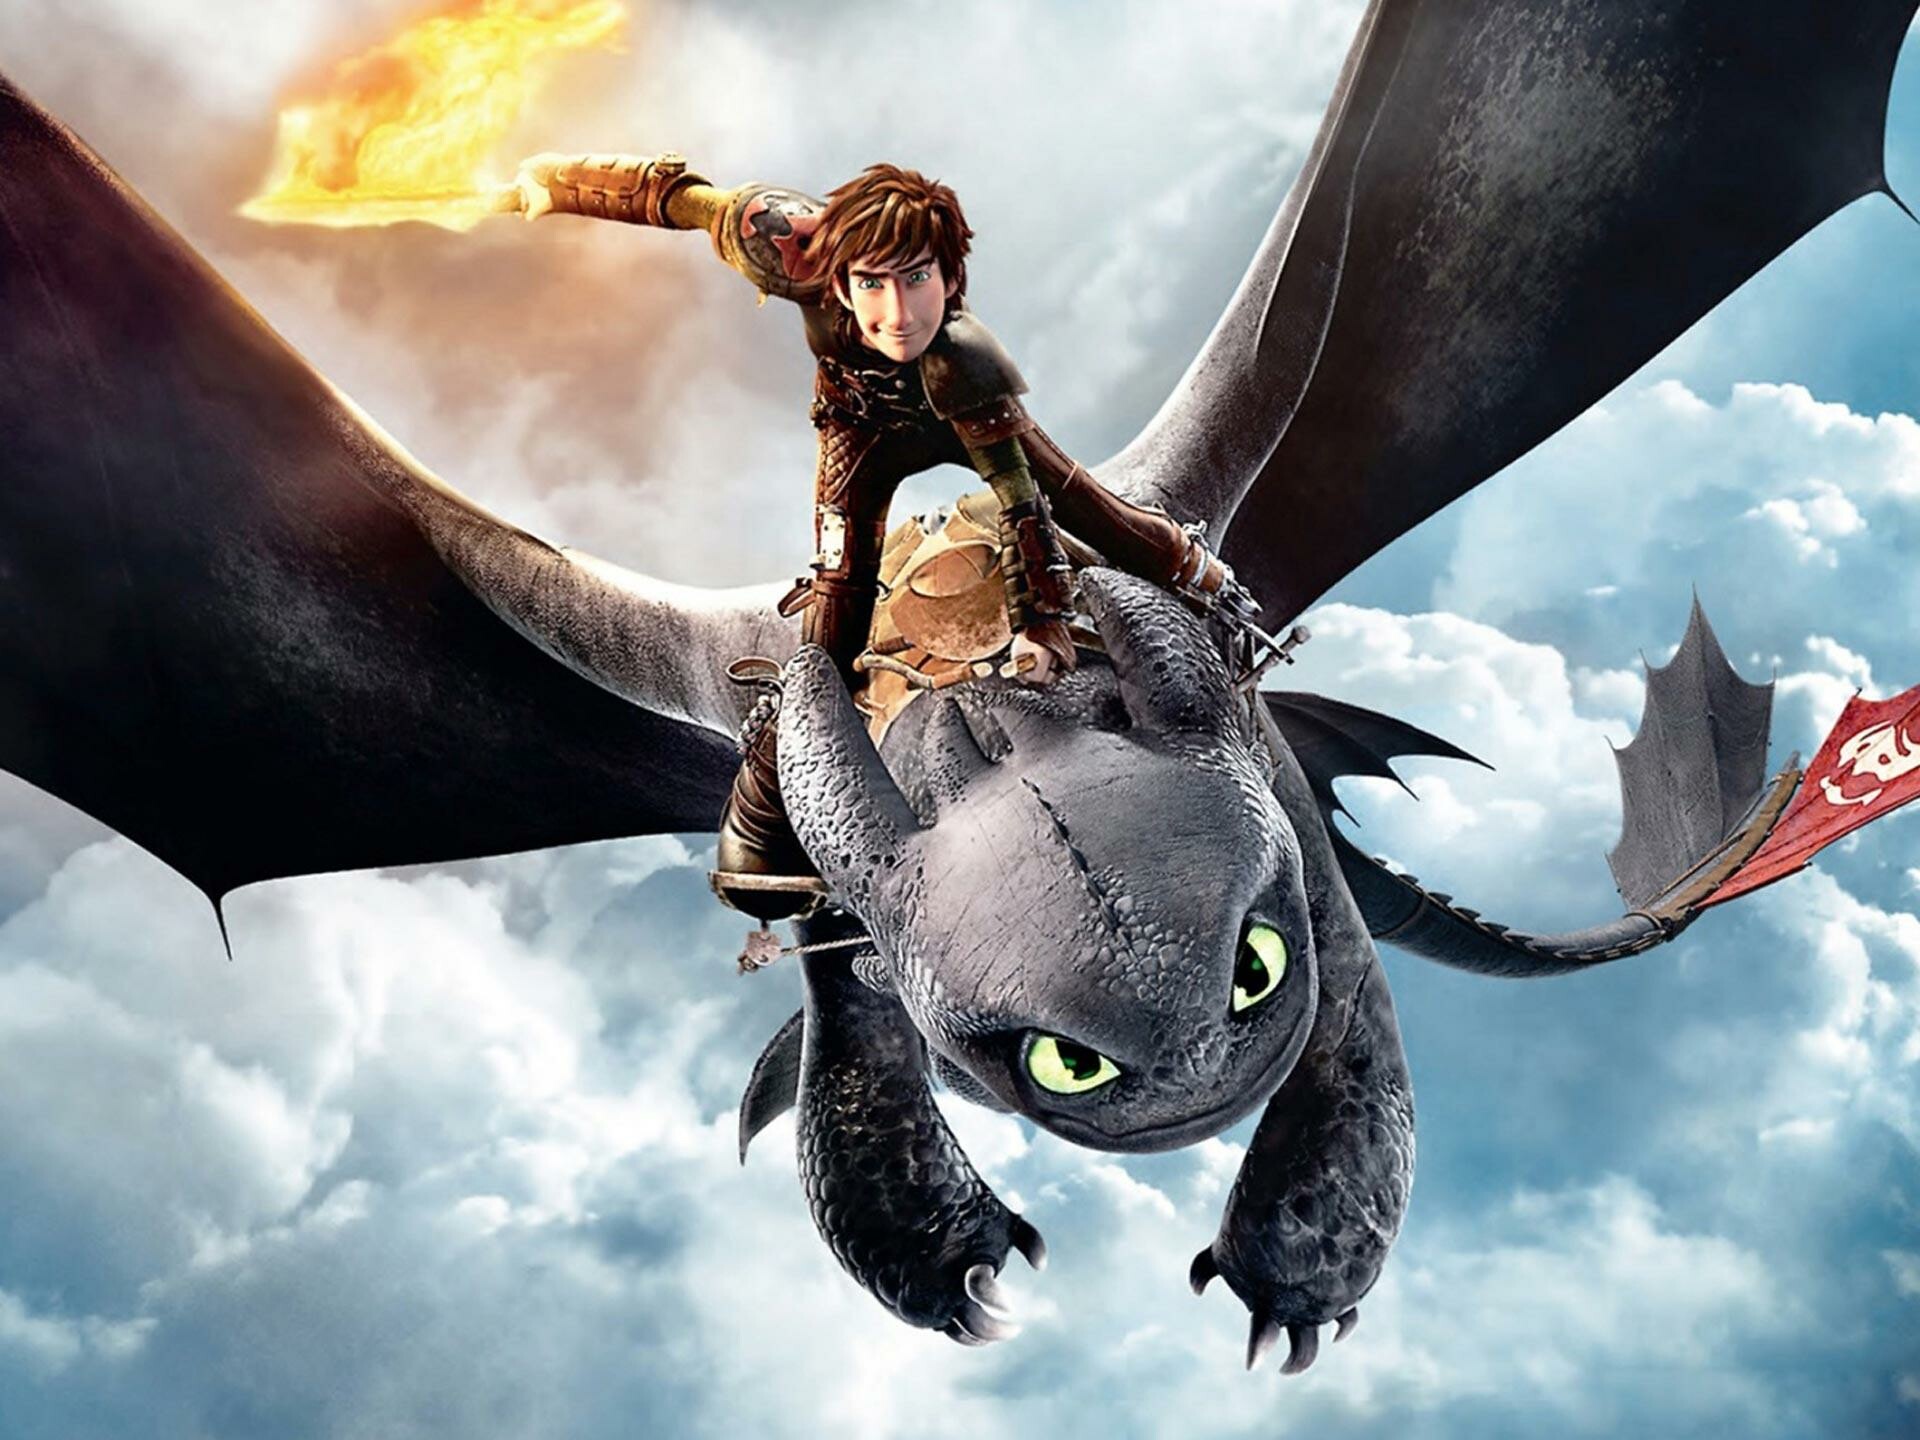 Train Your Dragon 2, Toothless wallpapers, 1920x1440 HD Desktop